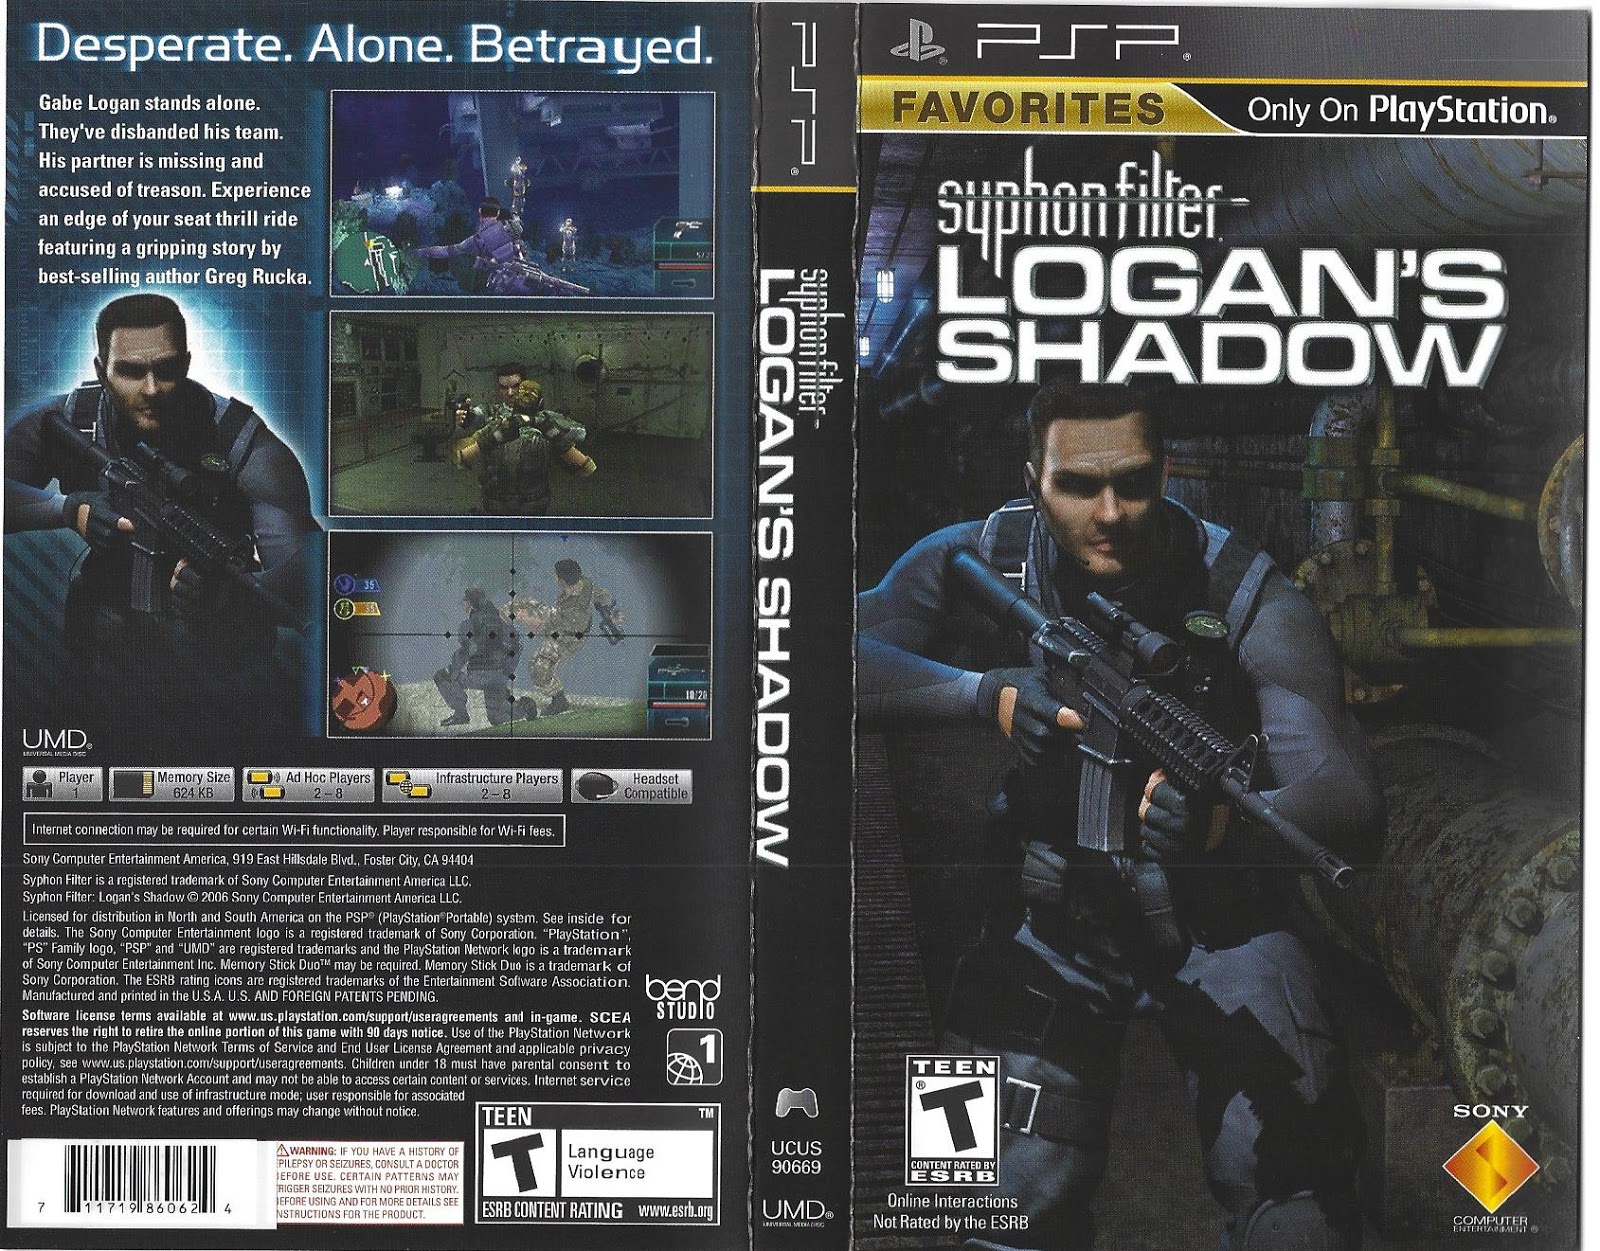 Syphon Filter Logan's Shadow PSP Highly Compressed 200mb